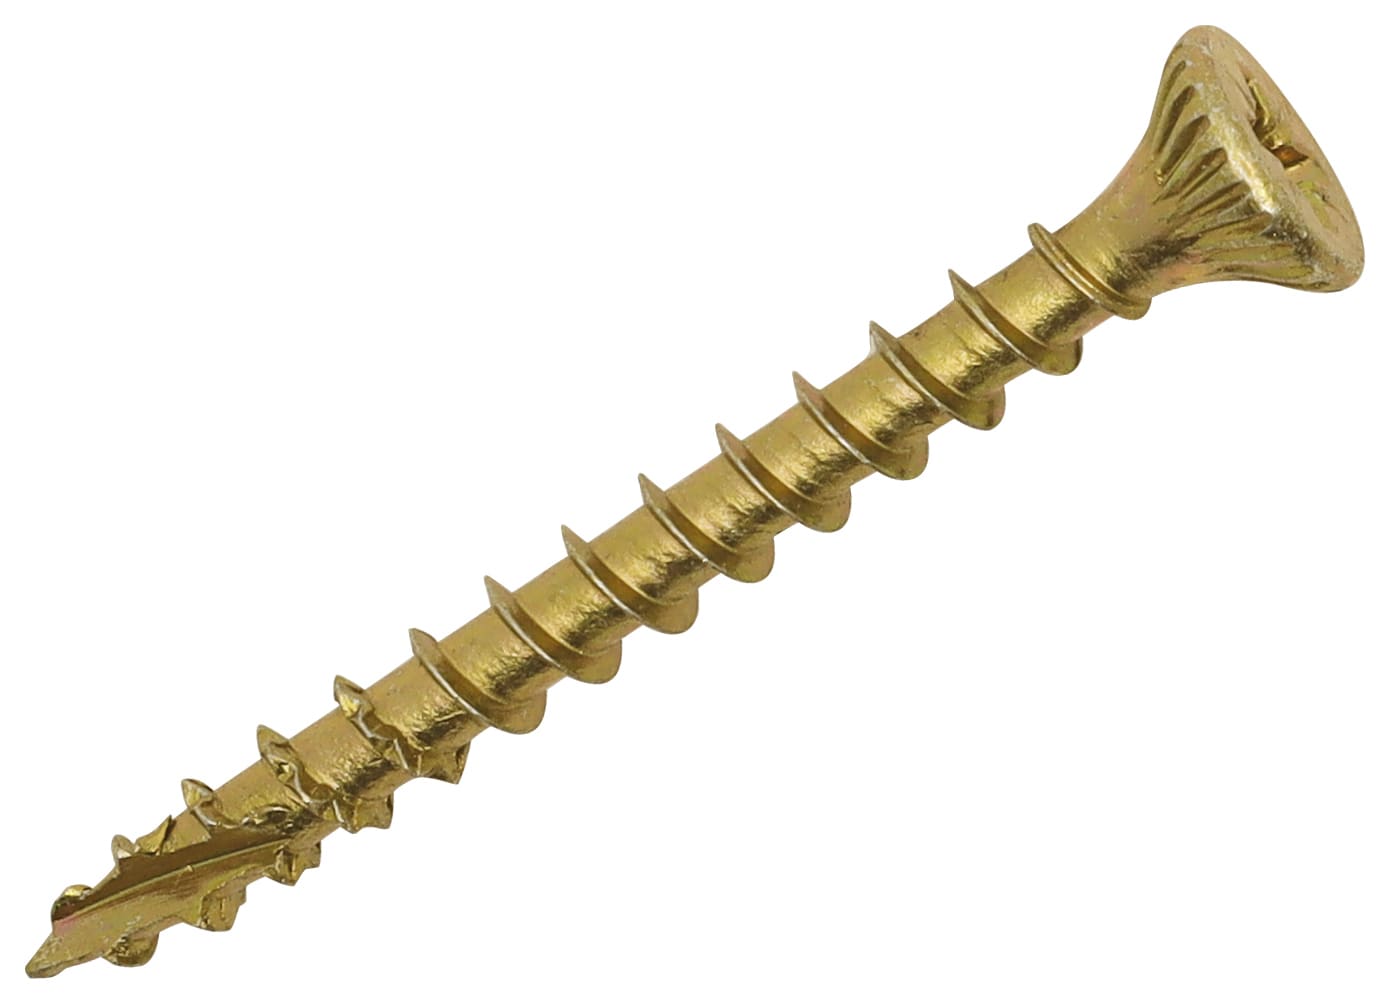 Optimaxx PZ Countersunk Passivated Double Reinforced Wood Screw